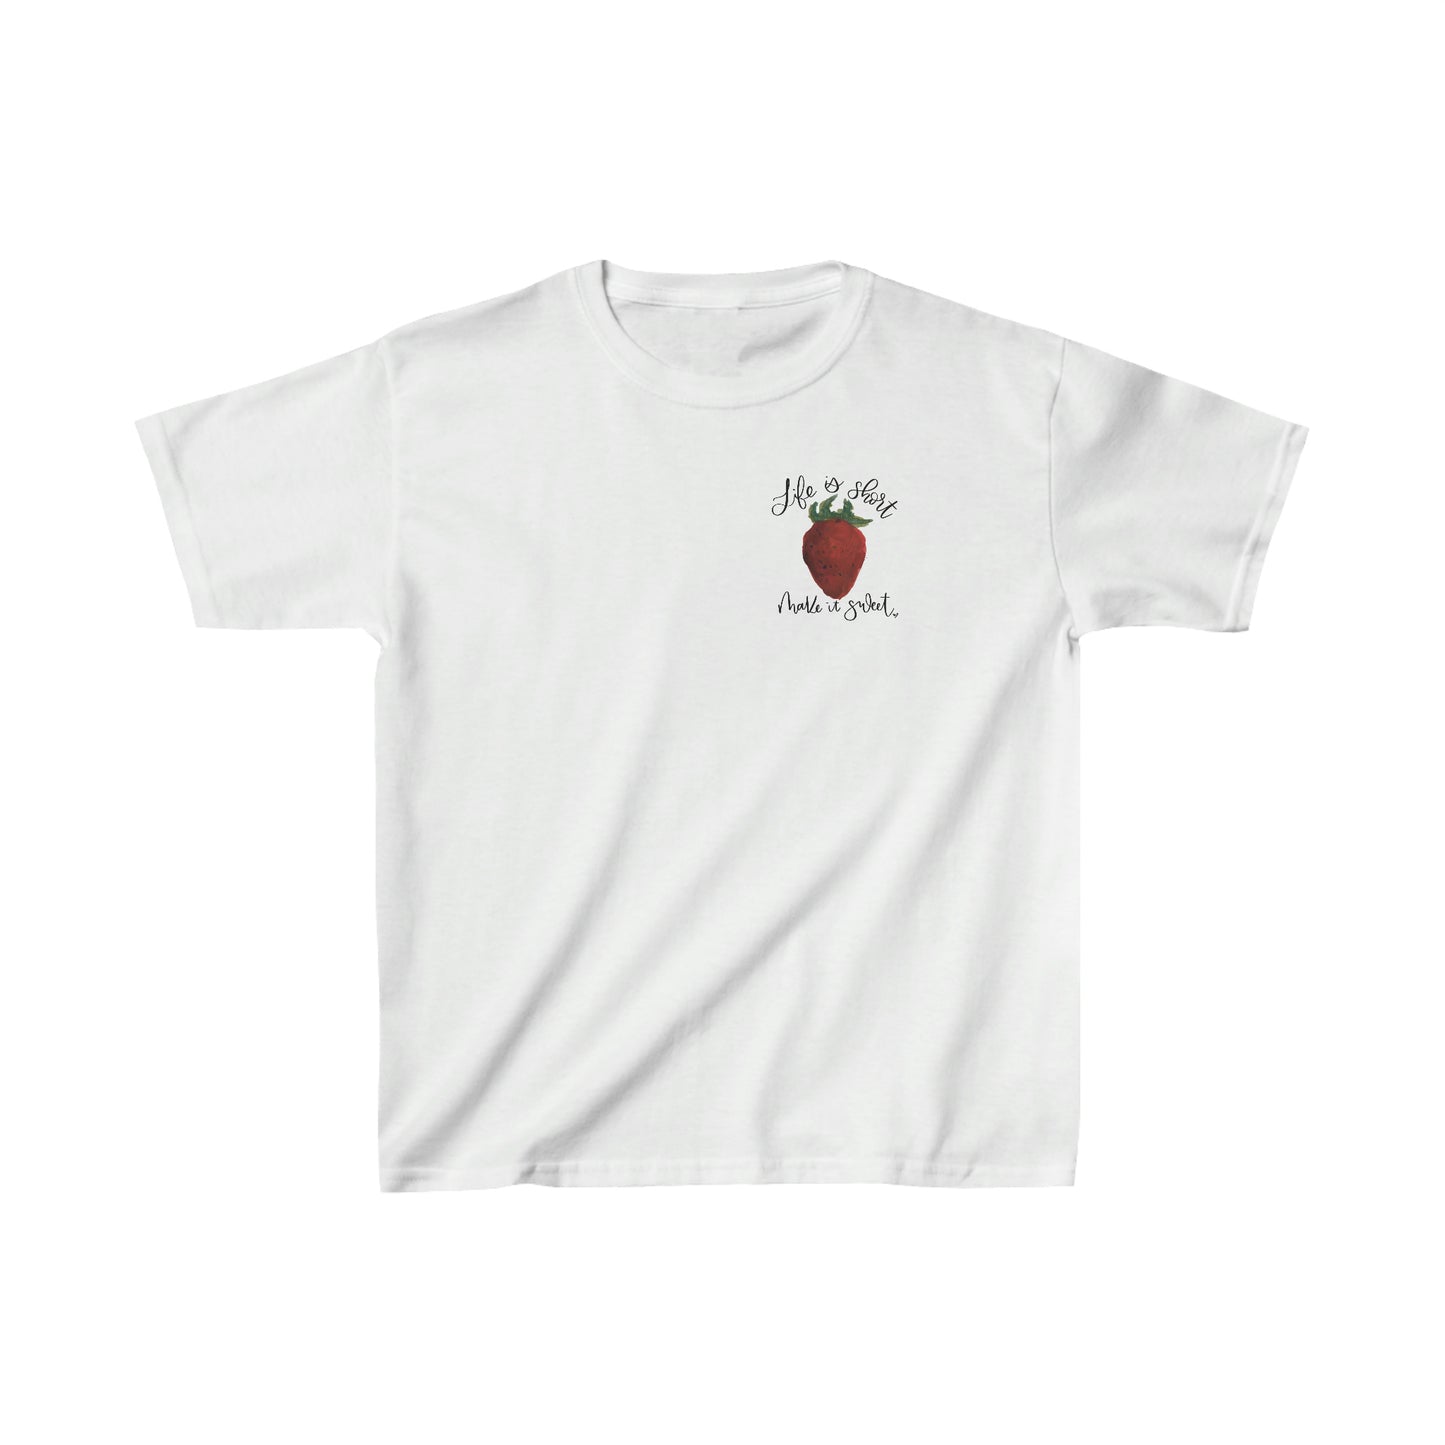 Load image into Gallery viewer, Life Is Short, Make It Sweet Kids Heavy Cotton Tee
